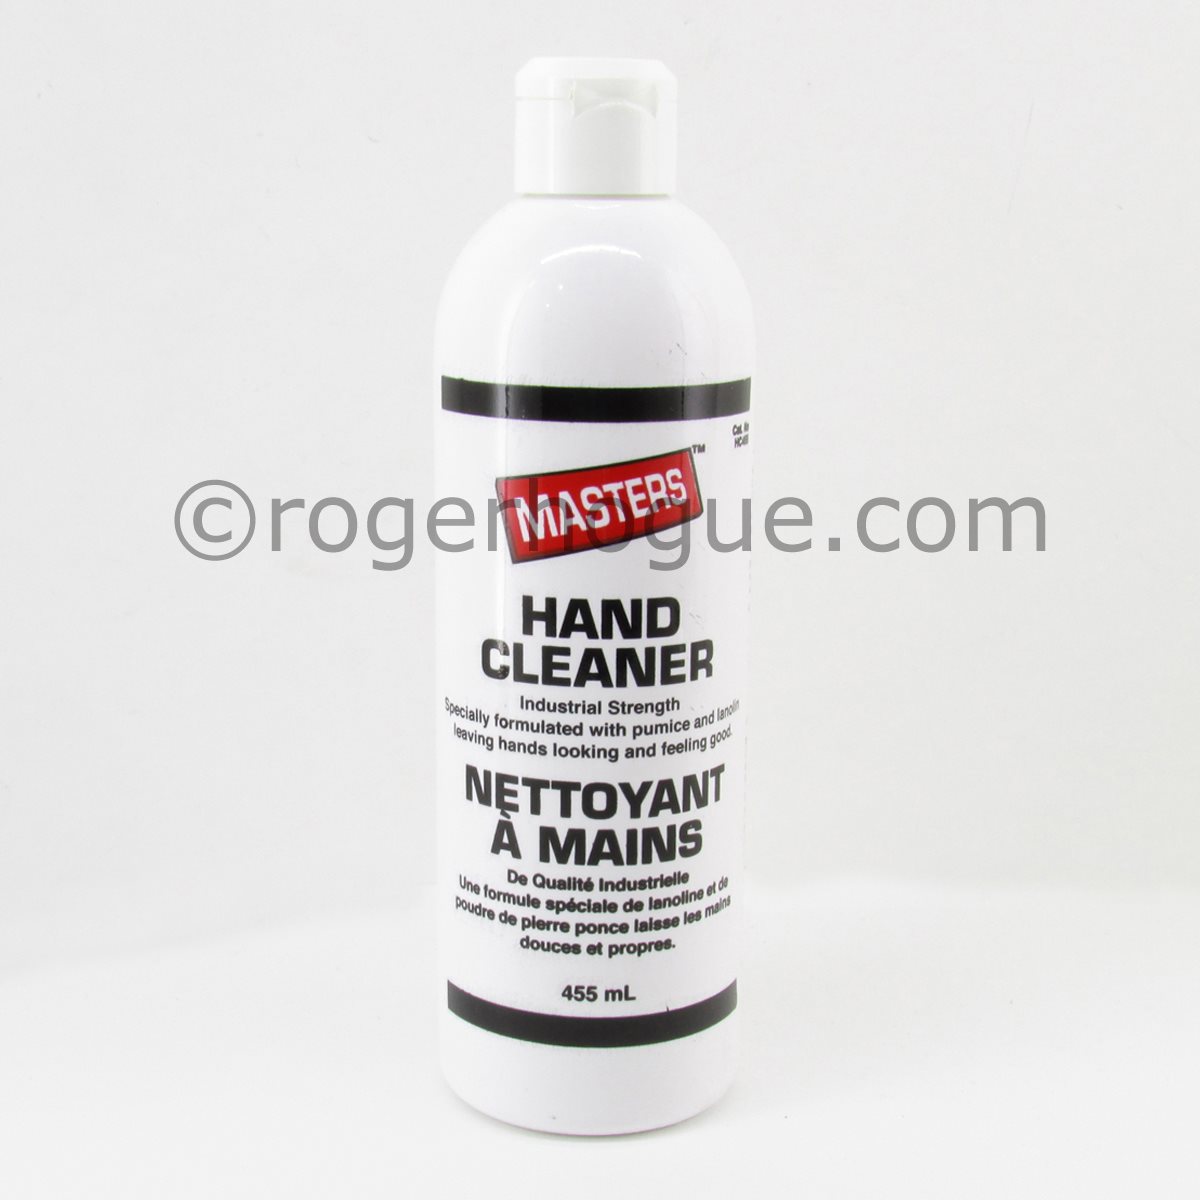 HAND CLEANER